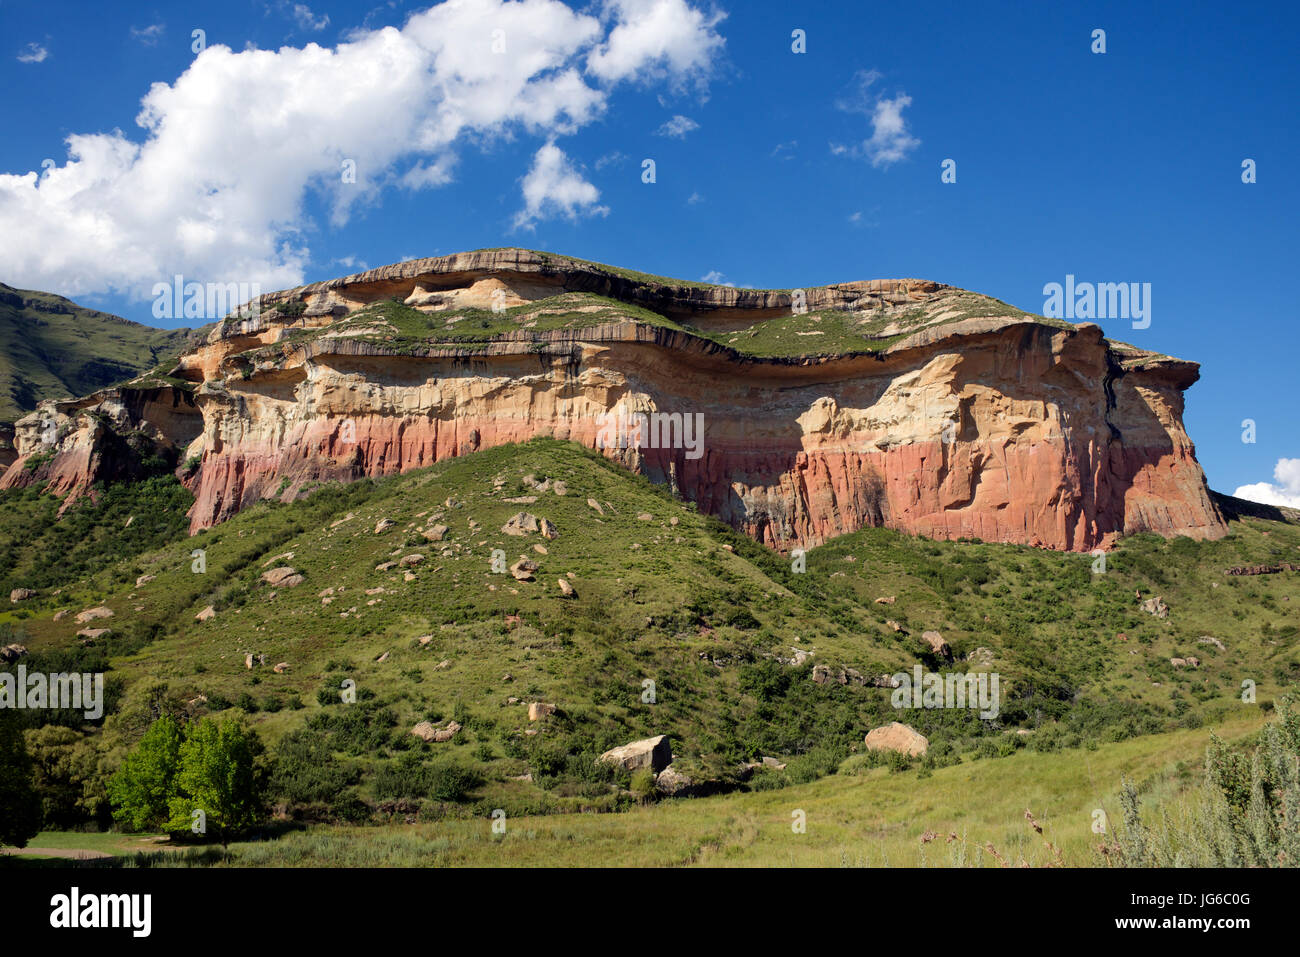 Sandstone outcrop Golden Gate National Park Free State South Africa Stock Photo